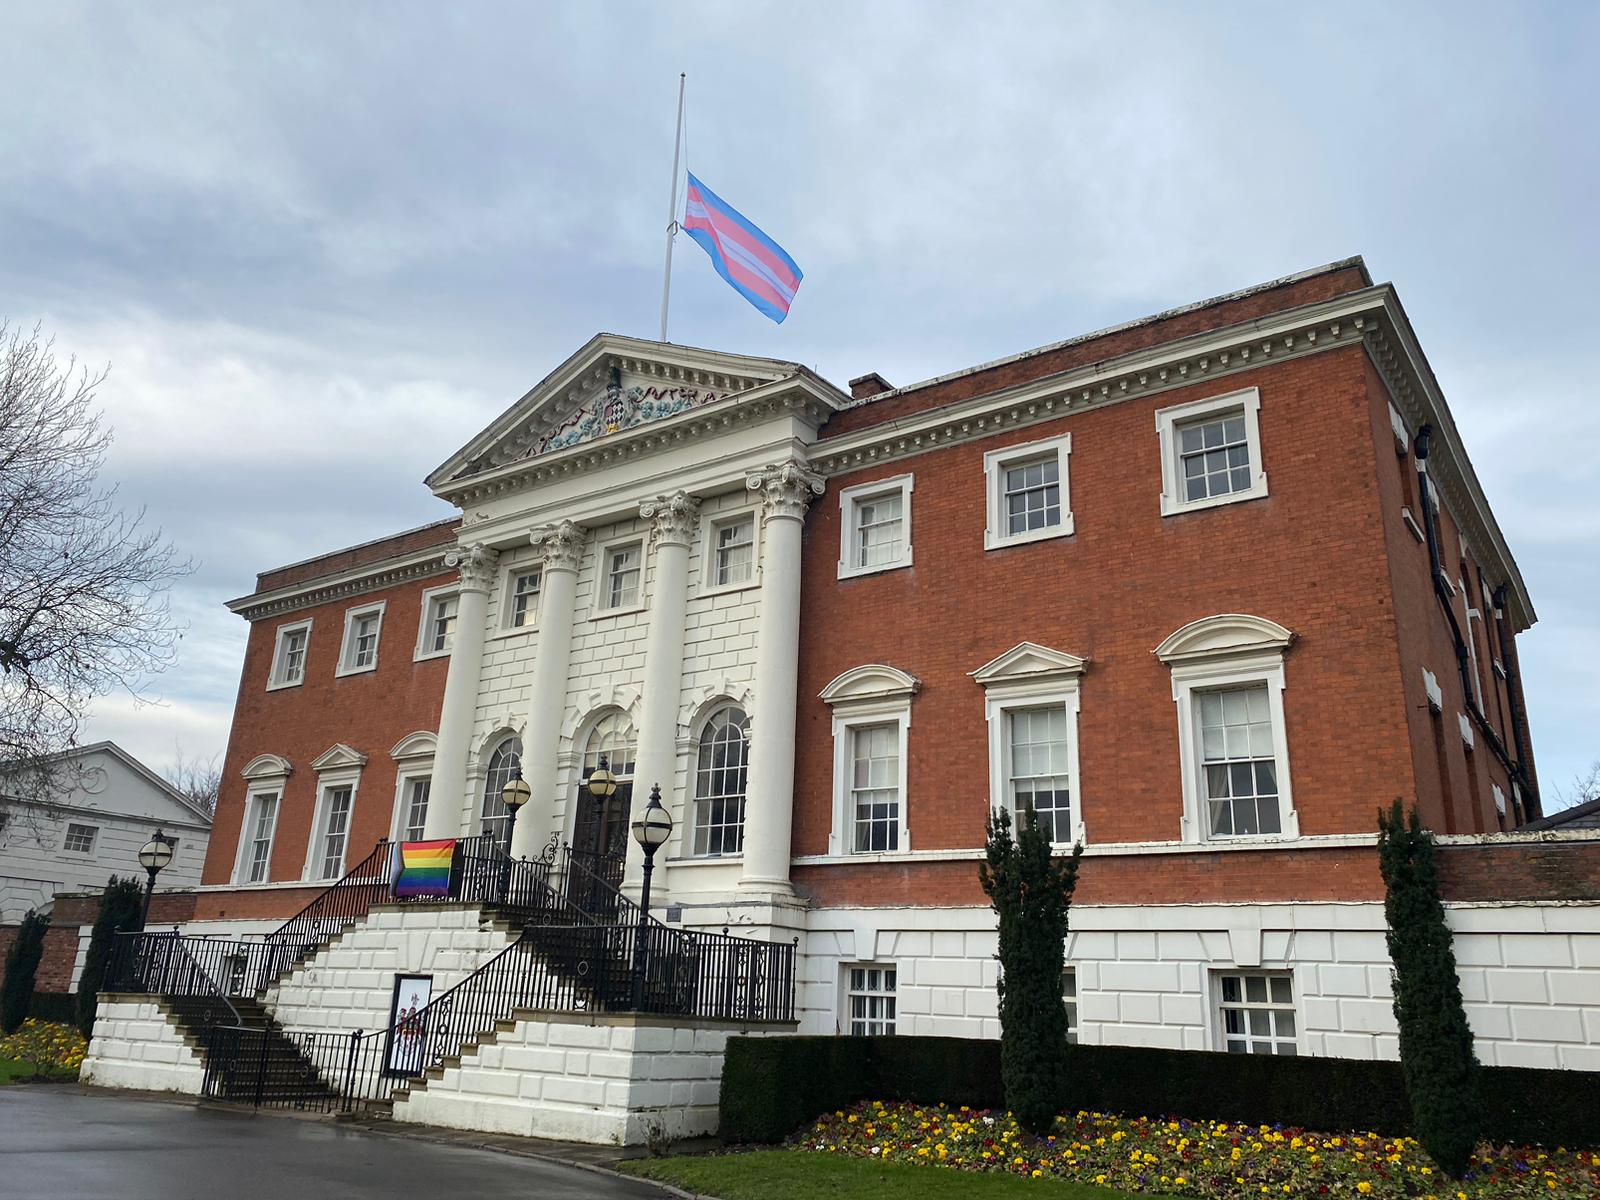 The Town Hall flag flying at half-mast with the trans flag on the flagpole and the progress pride flag affixed to the Town Hall railings